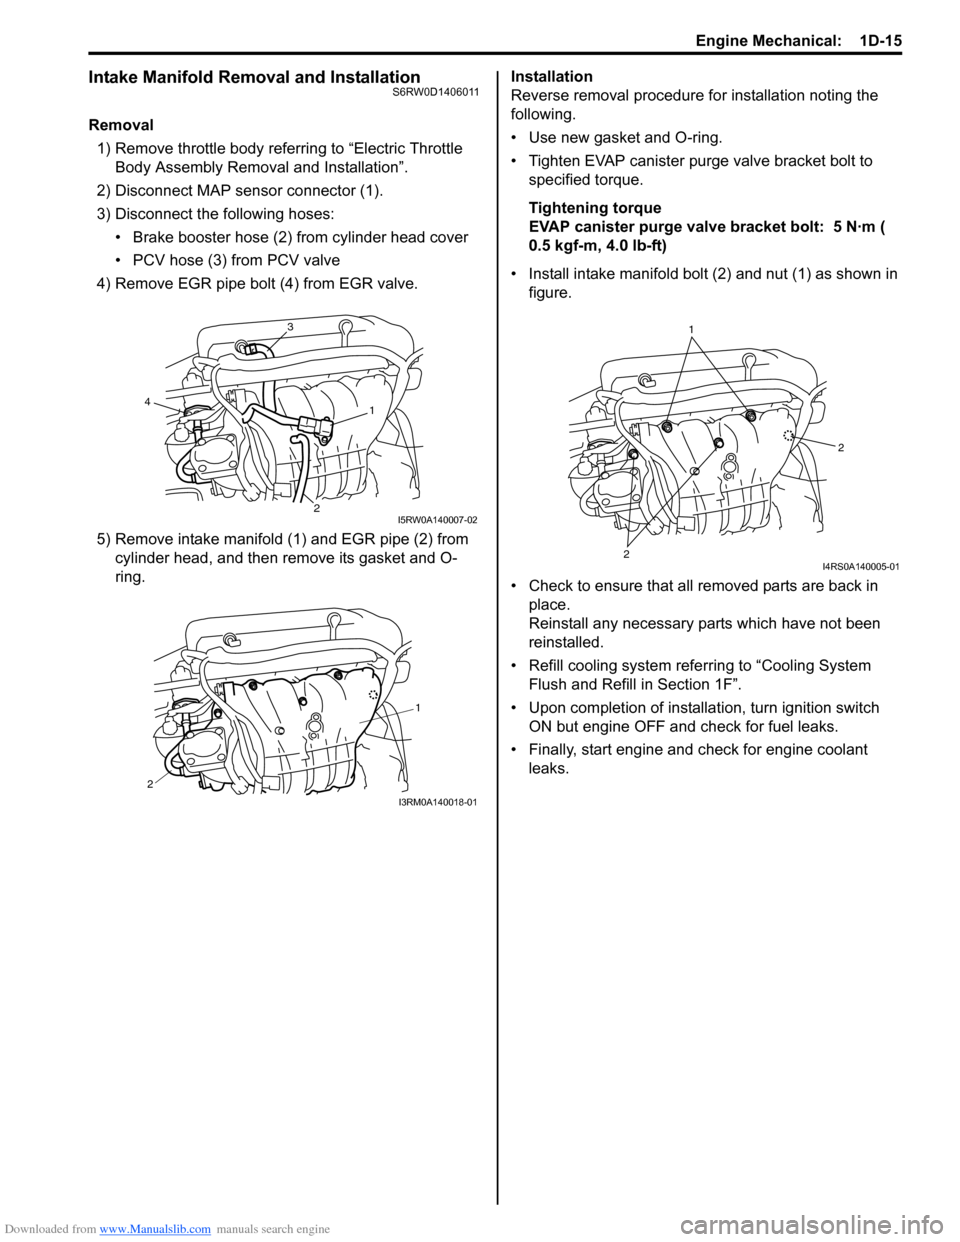 SUZUKI SX4 2006 1.G Service Workshop Manual Downloaded from www.Manualslib.com manuals search engine Engine Mechanical:  1D-15
Intake Manifold Removal and InstallationS6RW0D1406011
Removal
1) Remove throttle body referring to “Electric Thrott